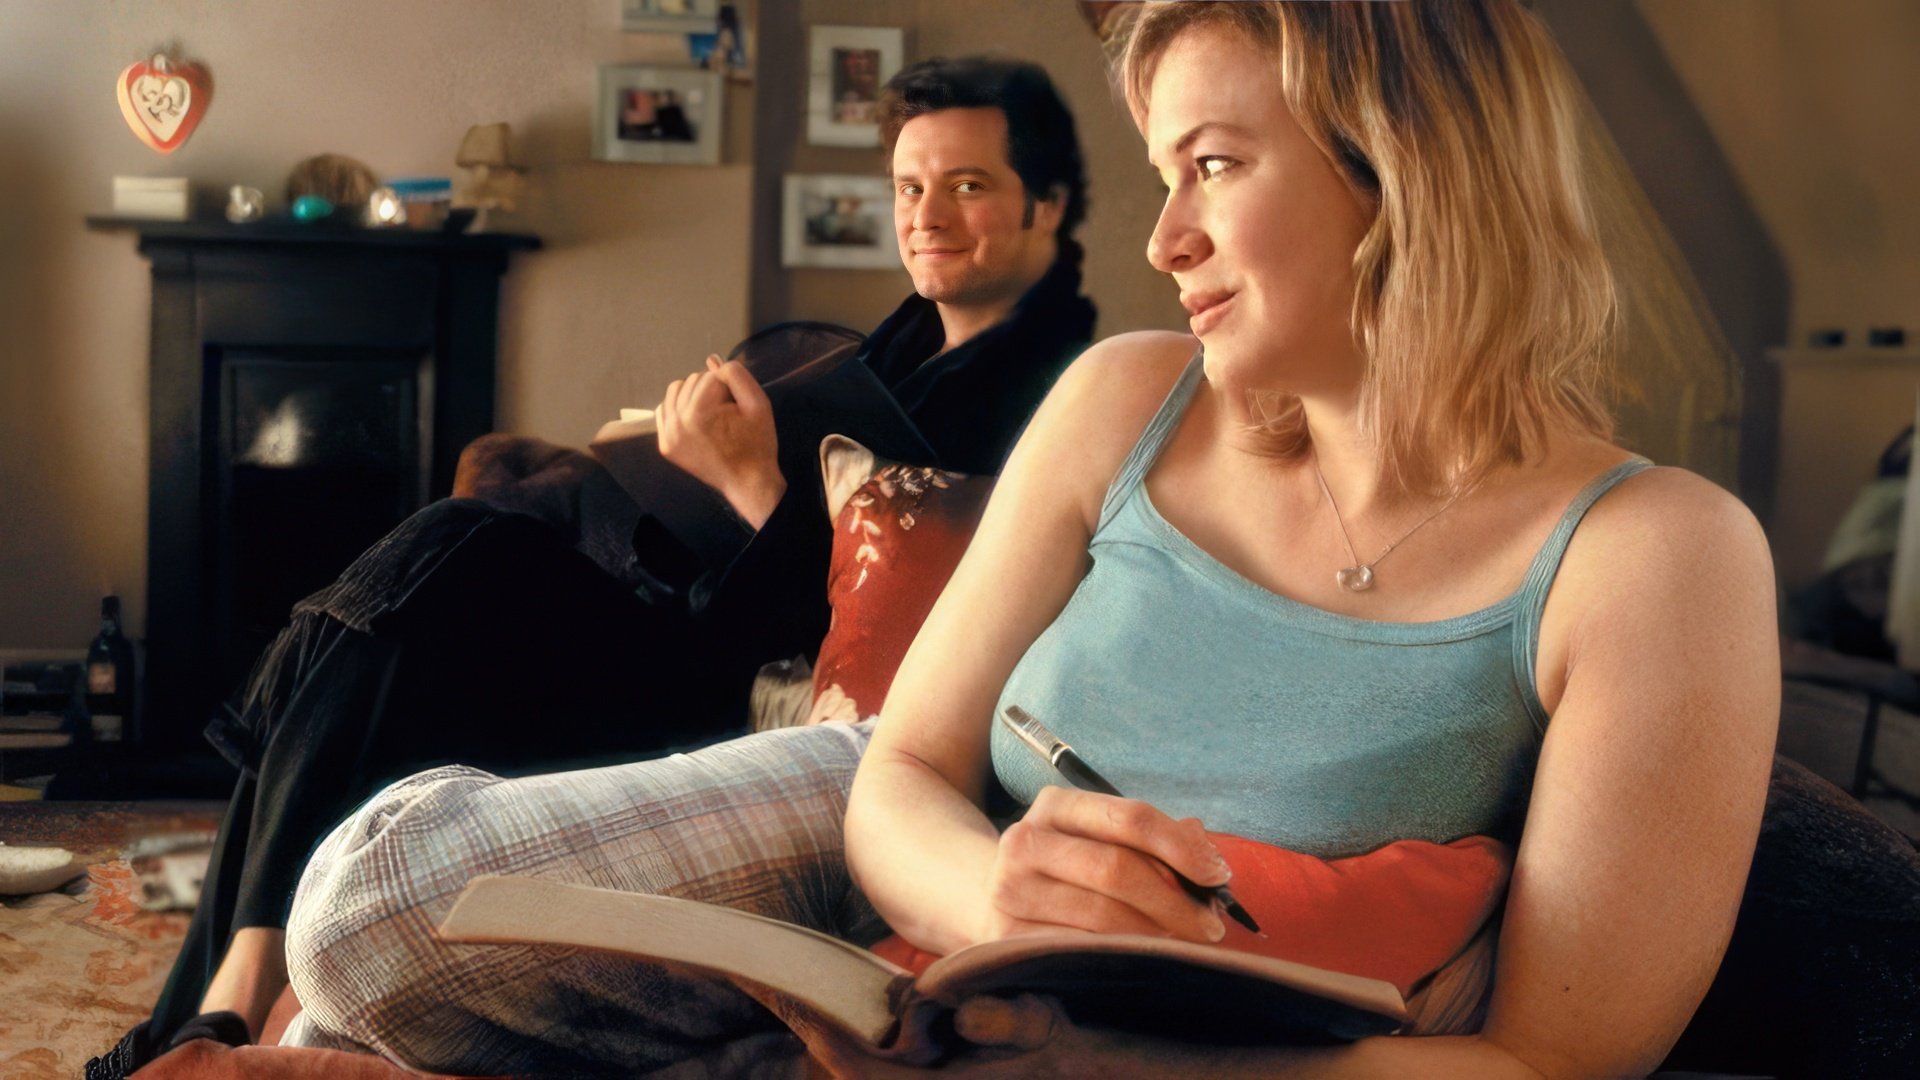 Renée Zellweger and Colin Firth’s tandem was highly appreciated by millions of people